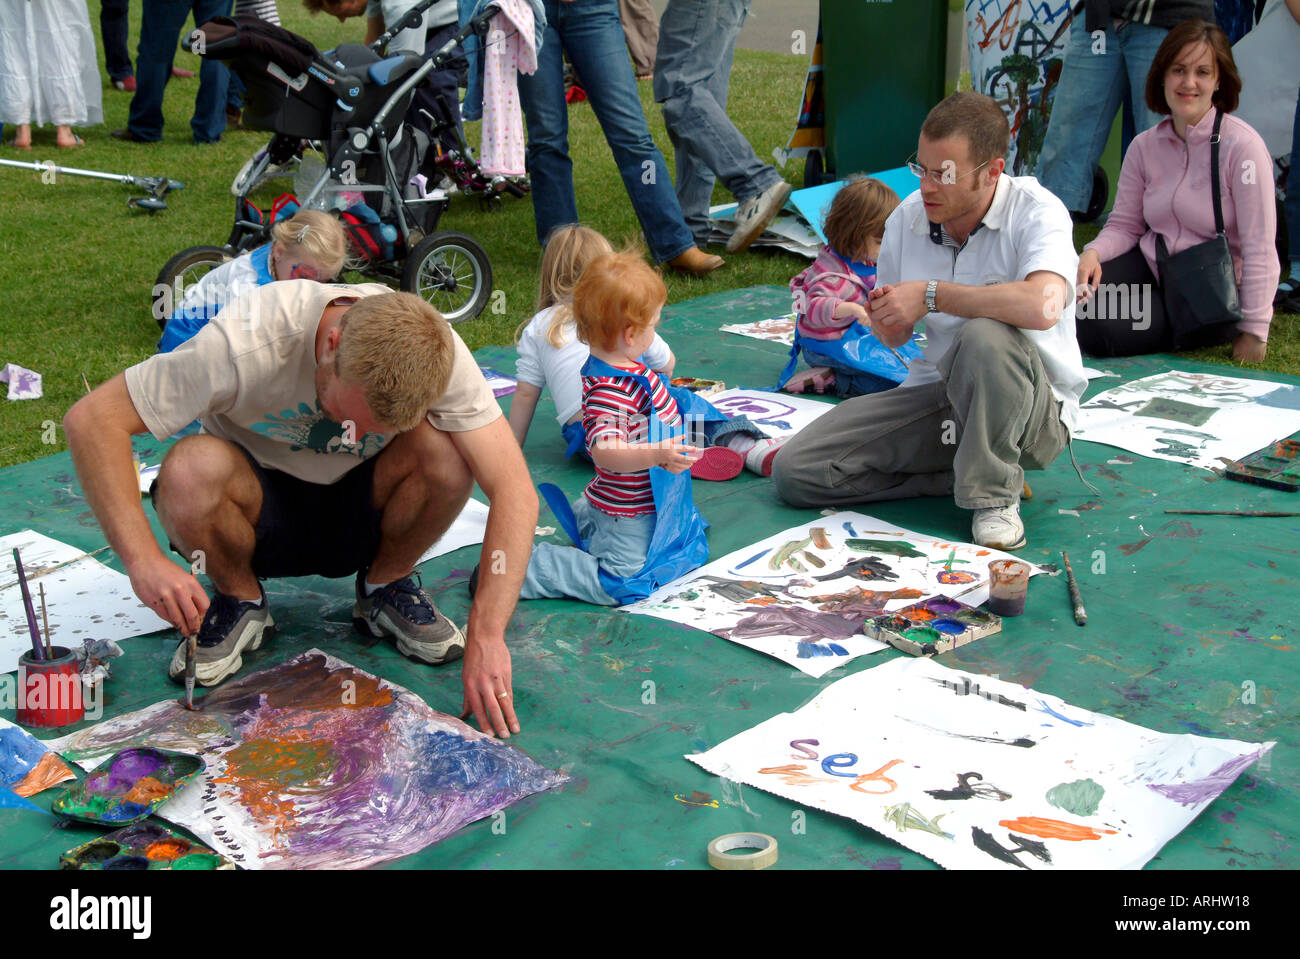 FATHERS IN PLAYGROUND IN COLOURING ACTIVITIES WITH THE CHILDREN SOUTHEAST LONDON JULY 2005 Stock Photo